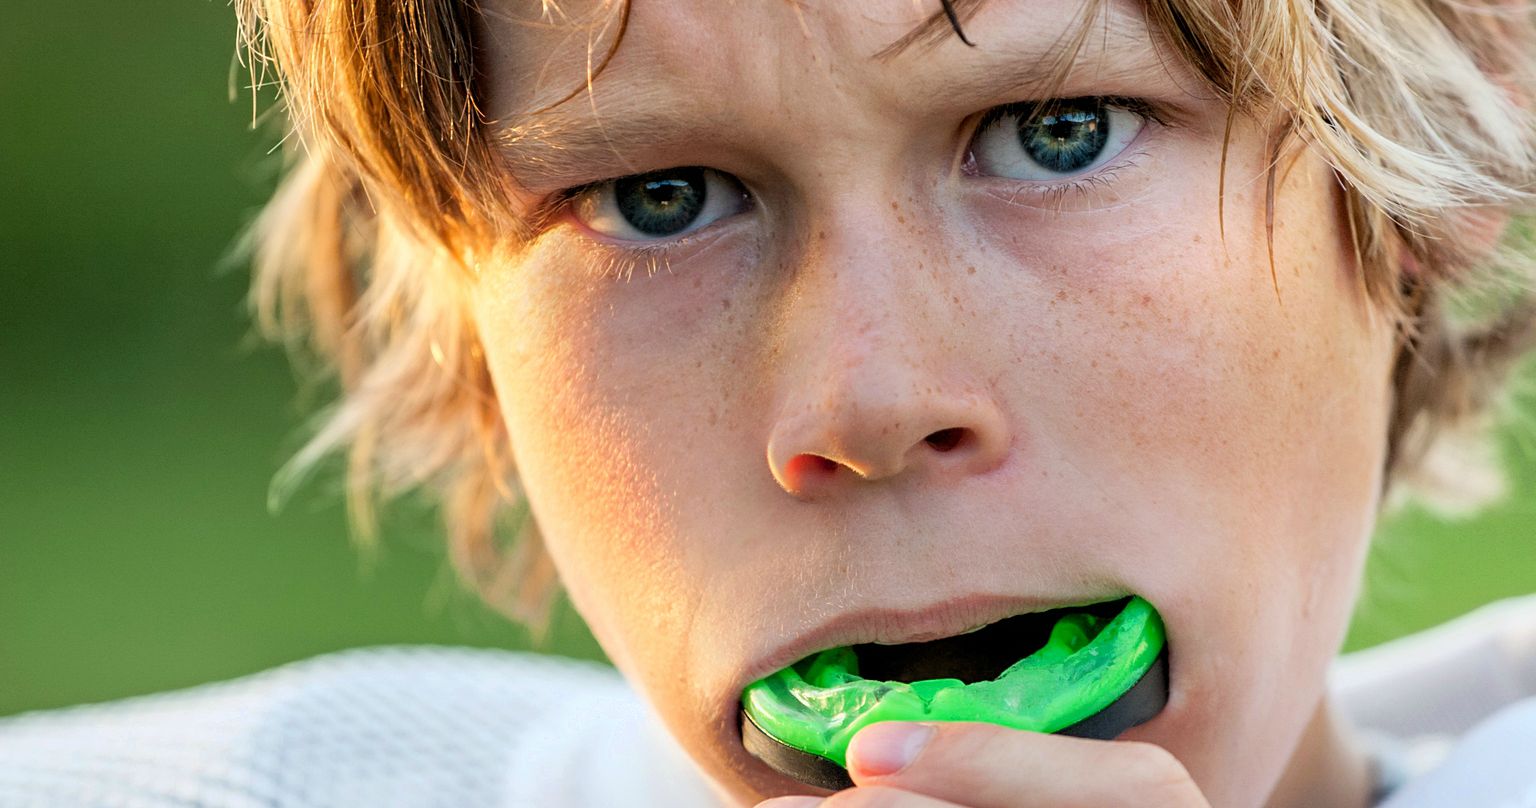 mouth guards are excellent protection for teeth